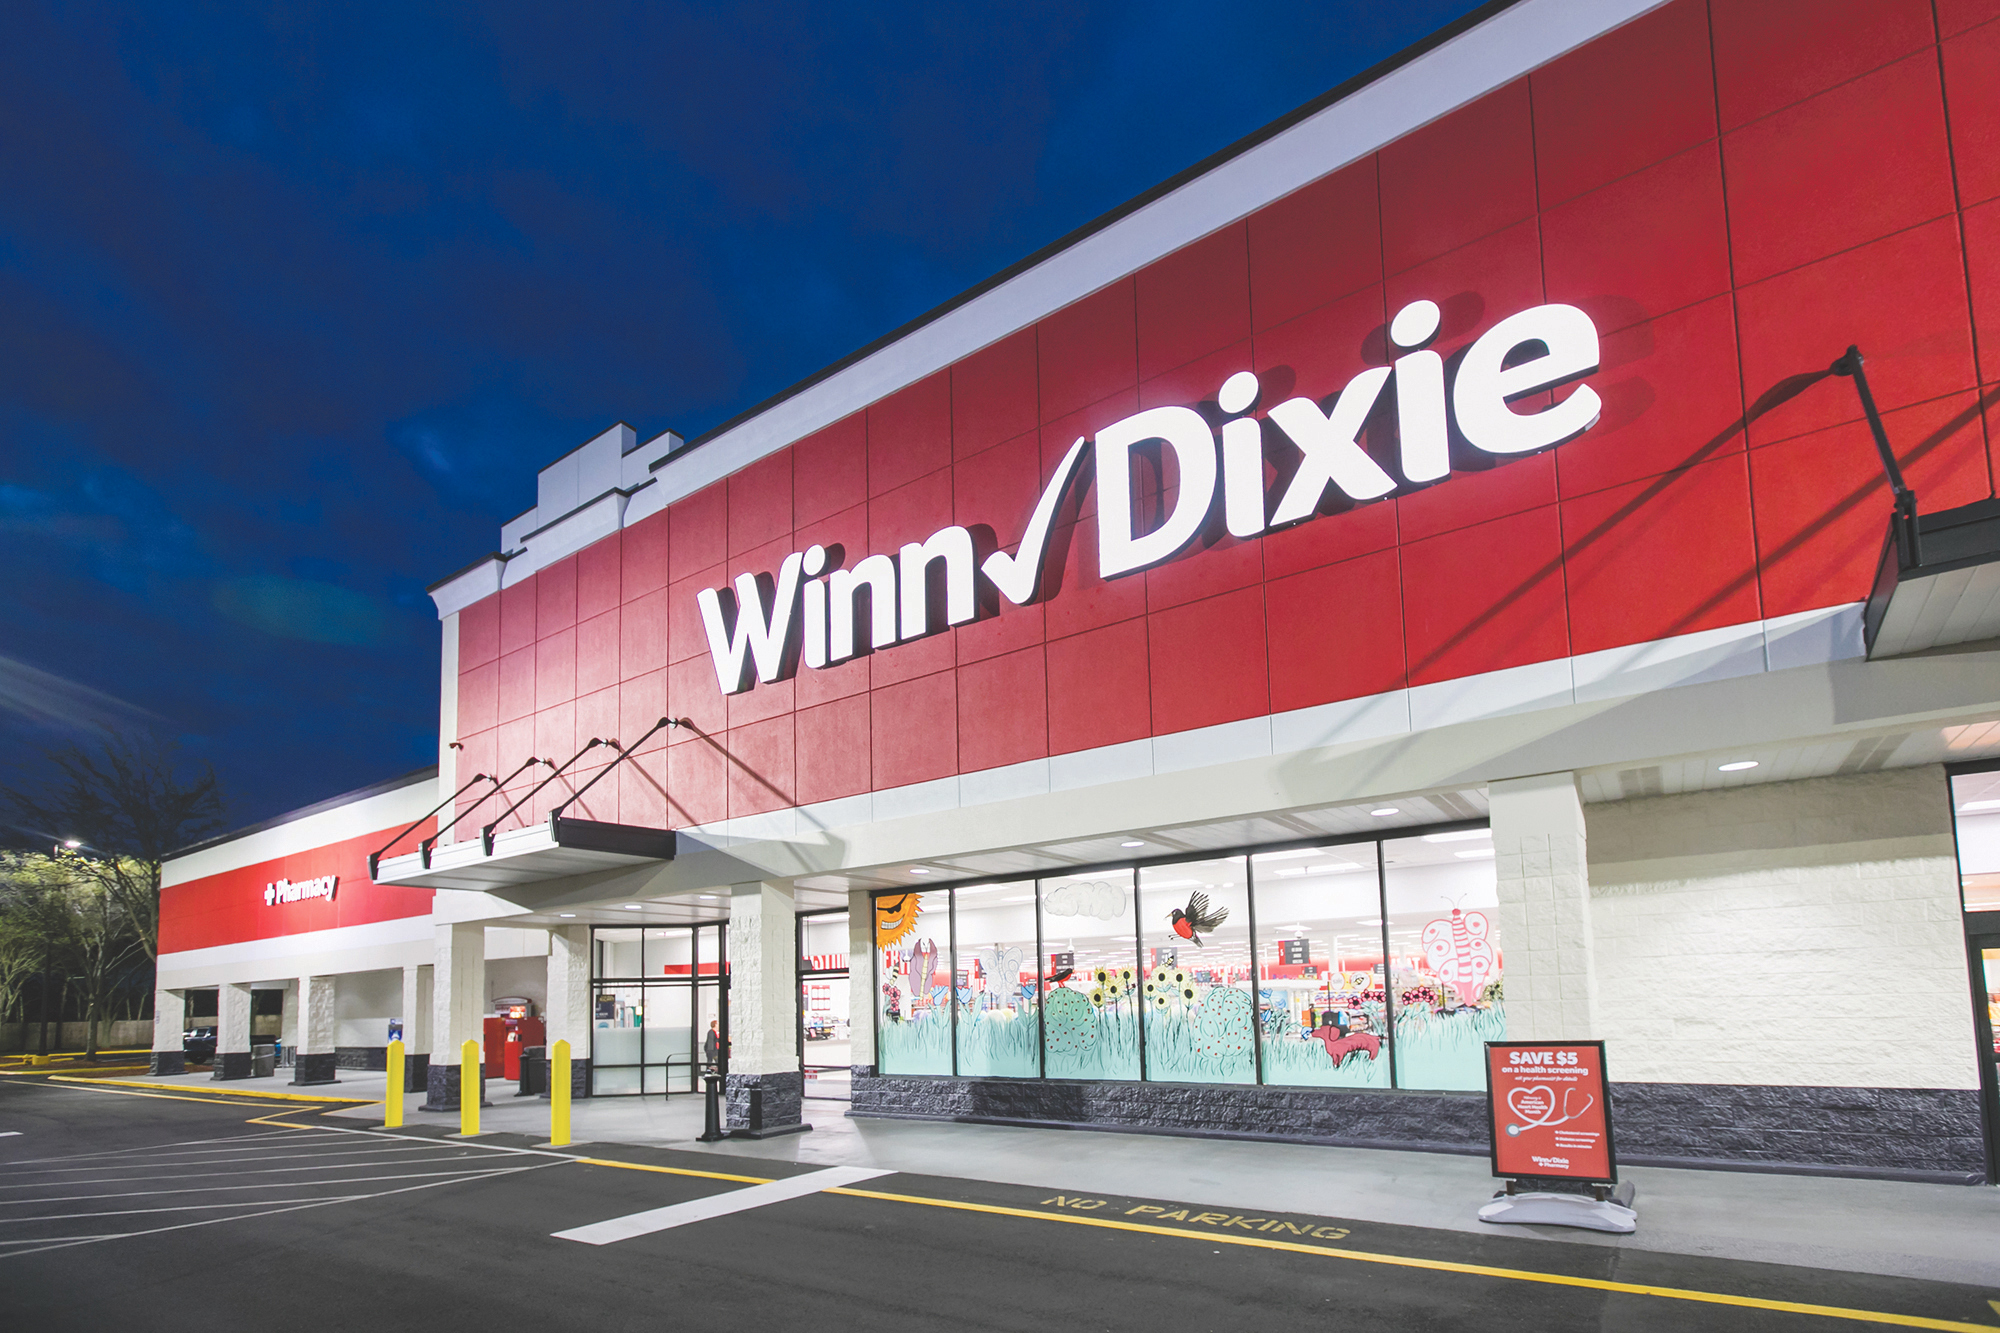 Southeastern Grocers, the parent company of Winn-Dixie, could receive city incentives to open a store in the closed Publix space at Gateway Town Center.